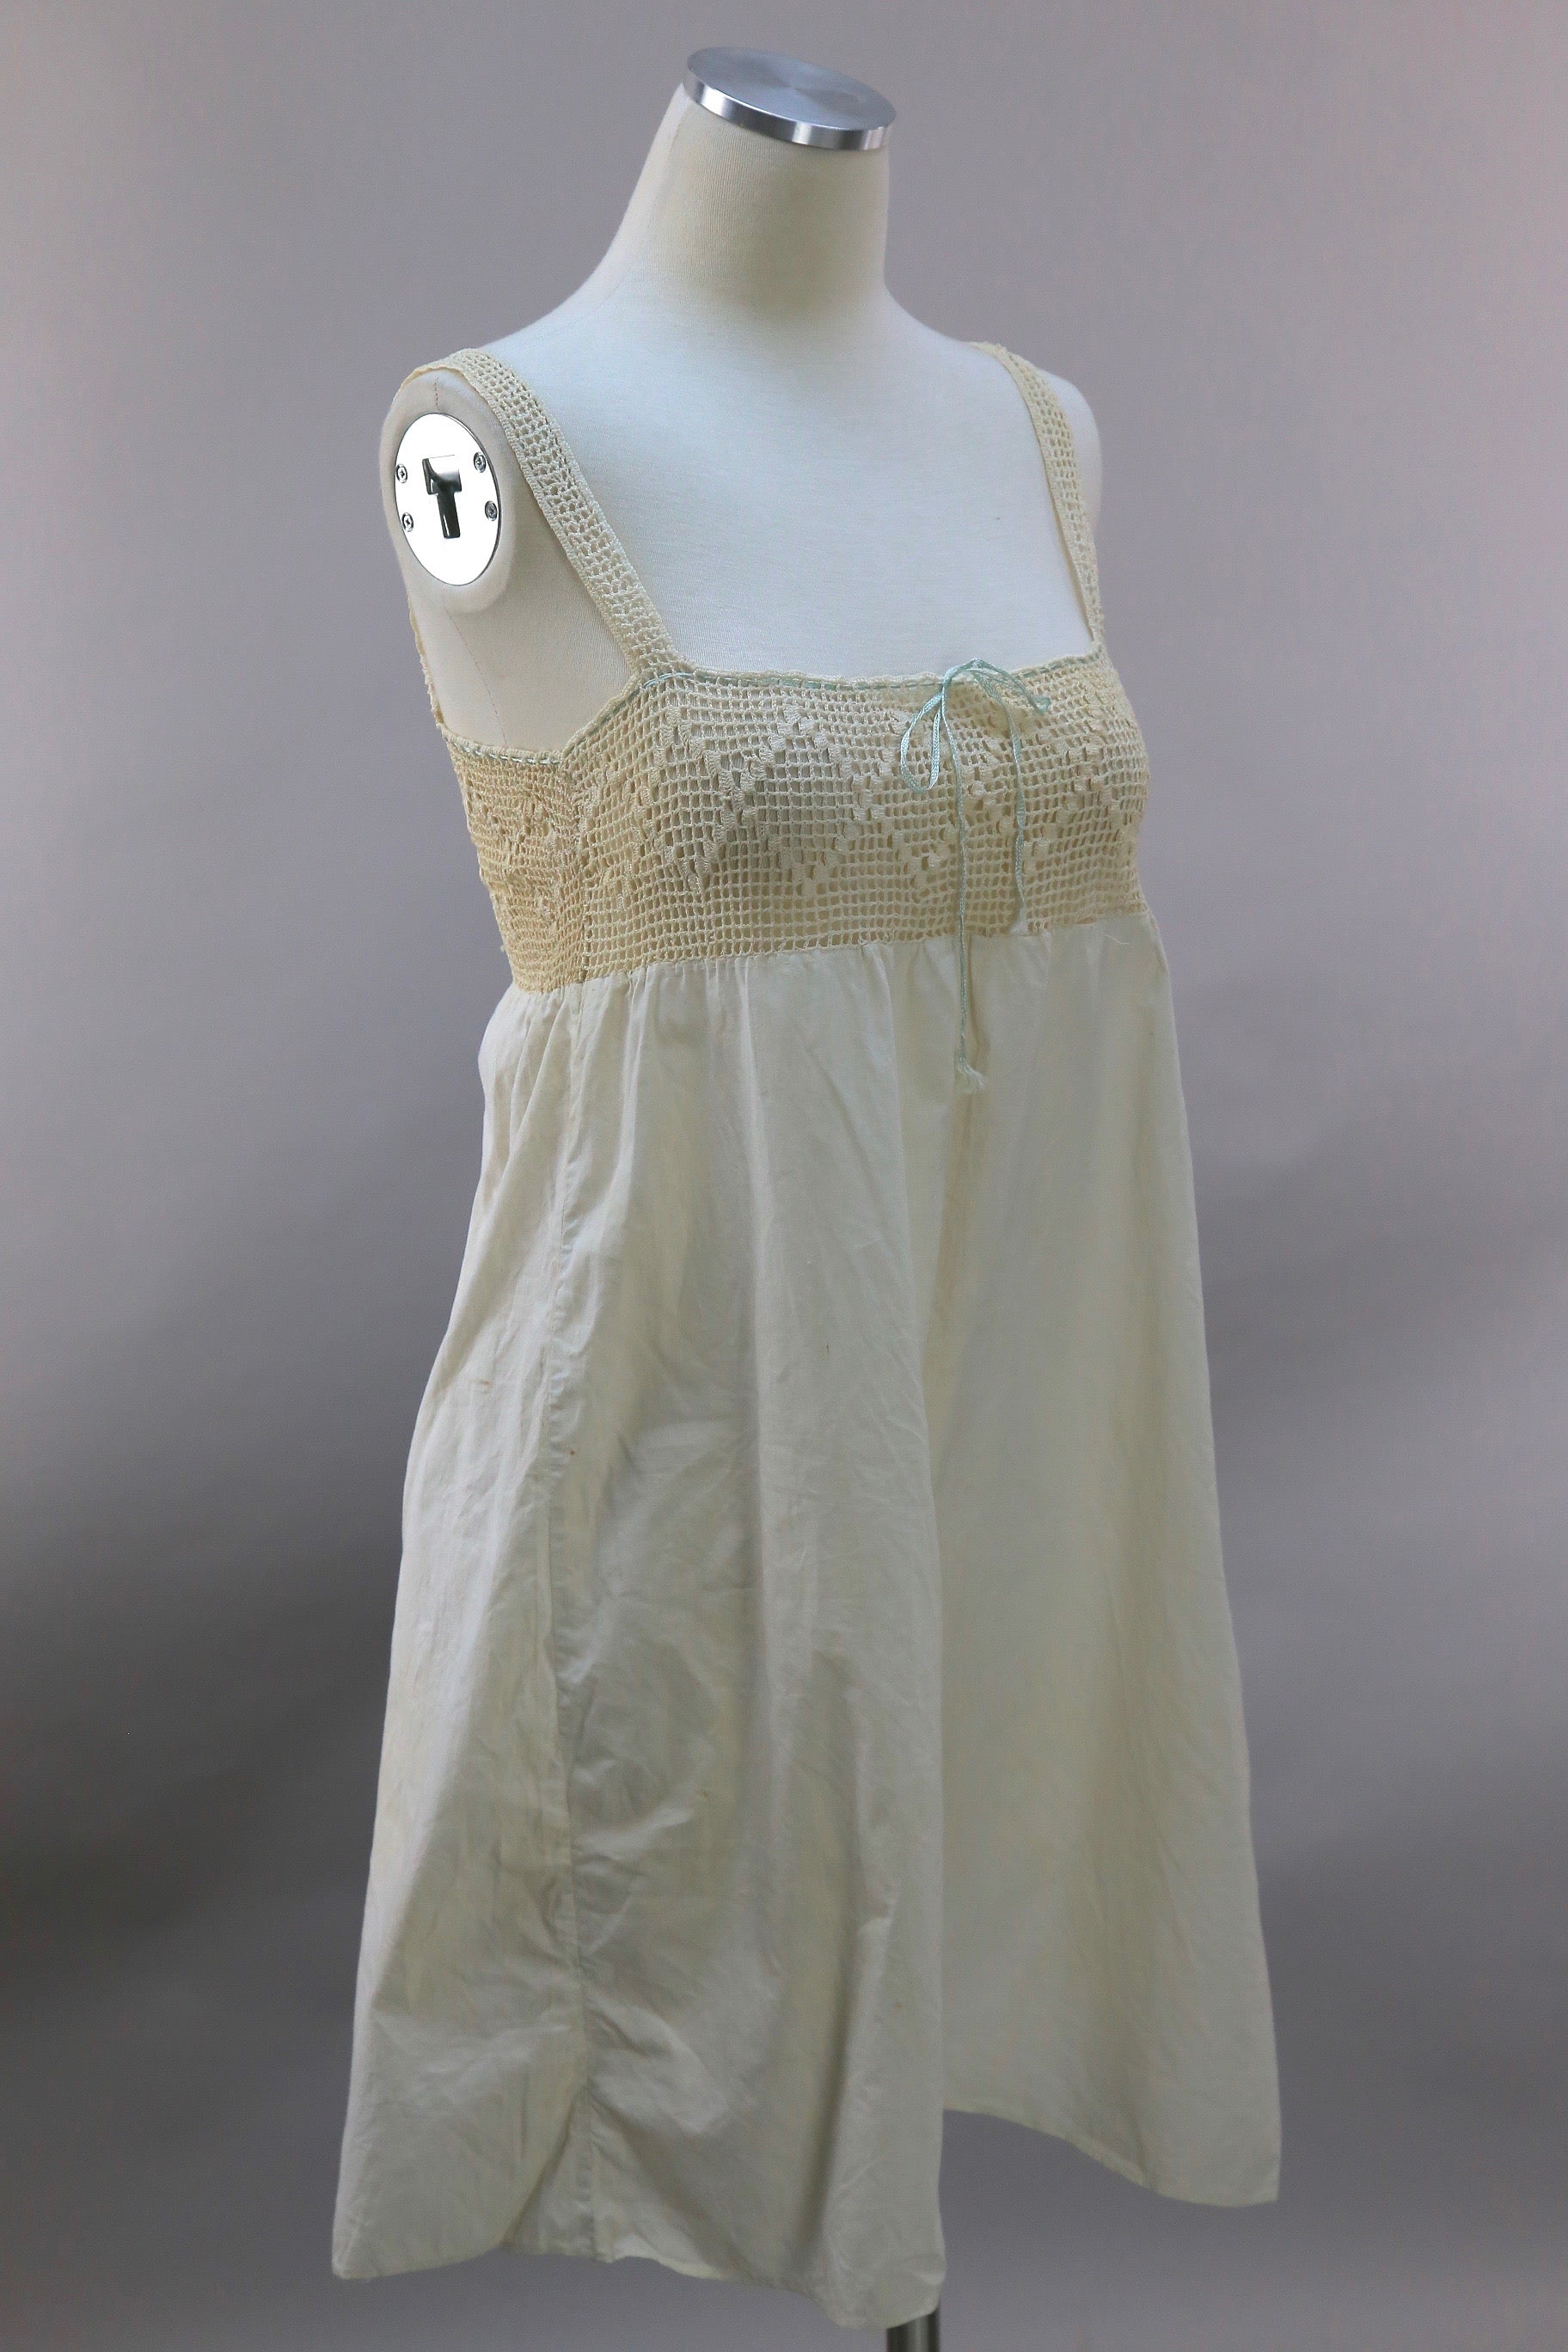 Vintage 1920s step in chemise cream cotton w crochet lace top